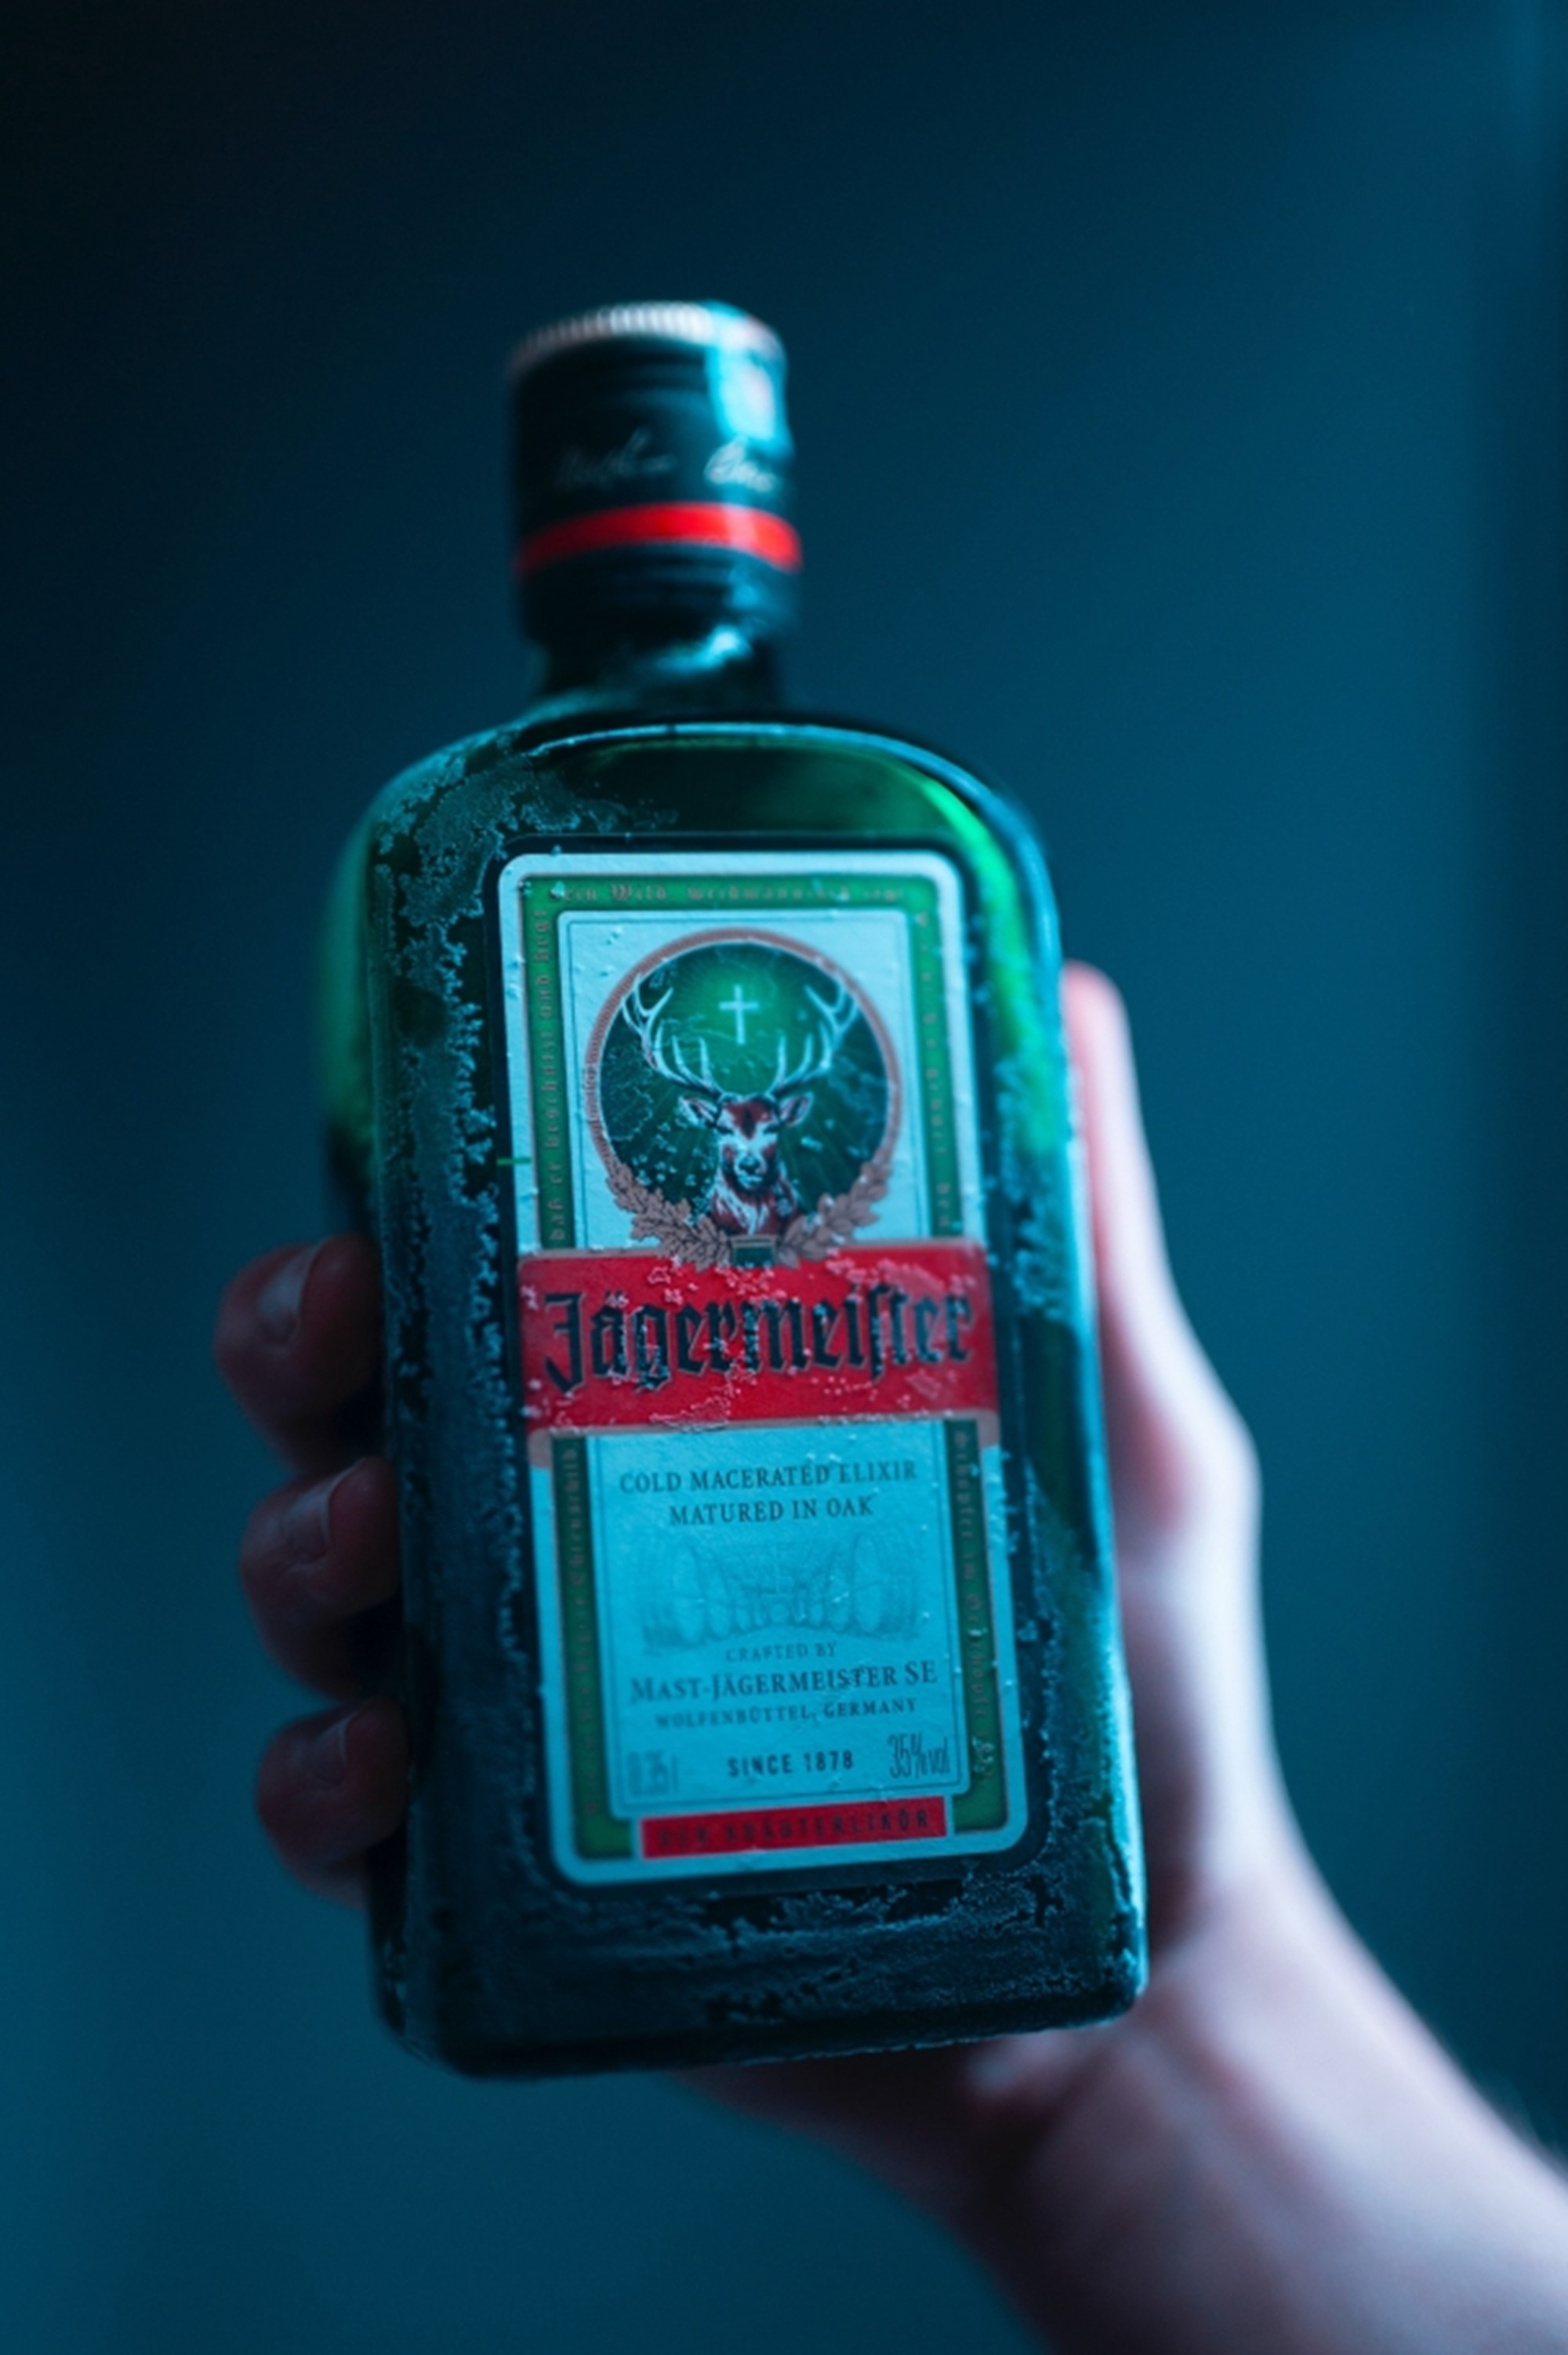 Jagermeister with Red Bull, popular and dangerous